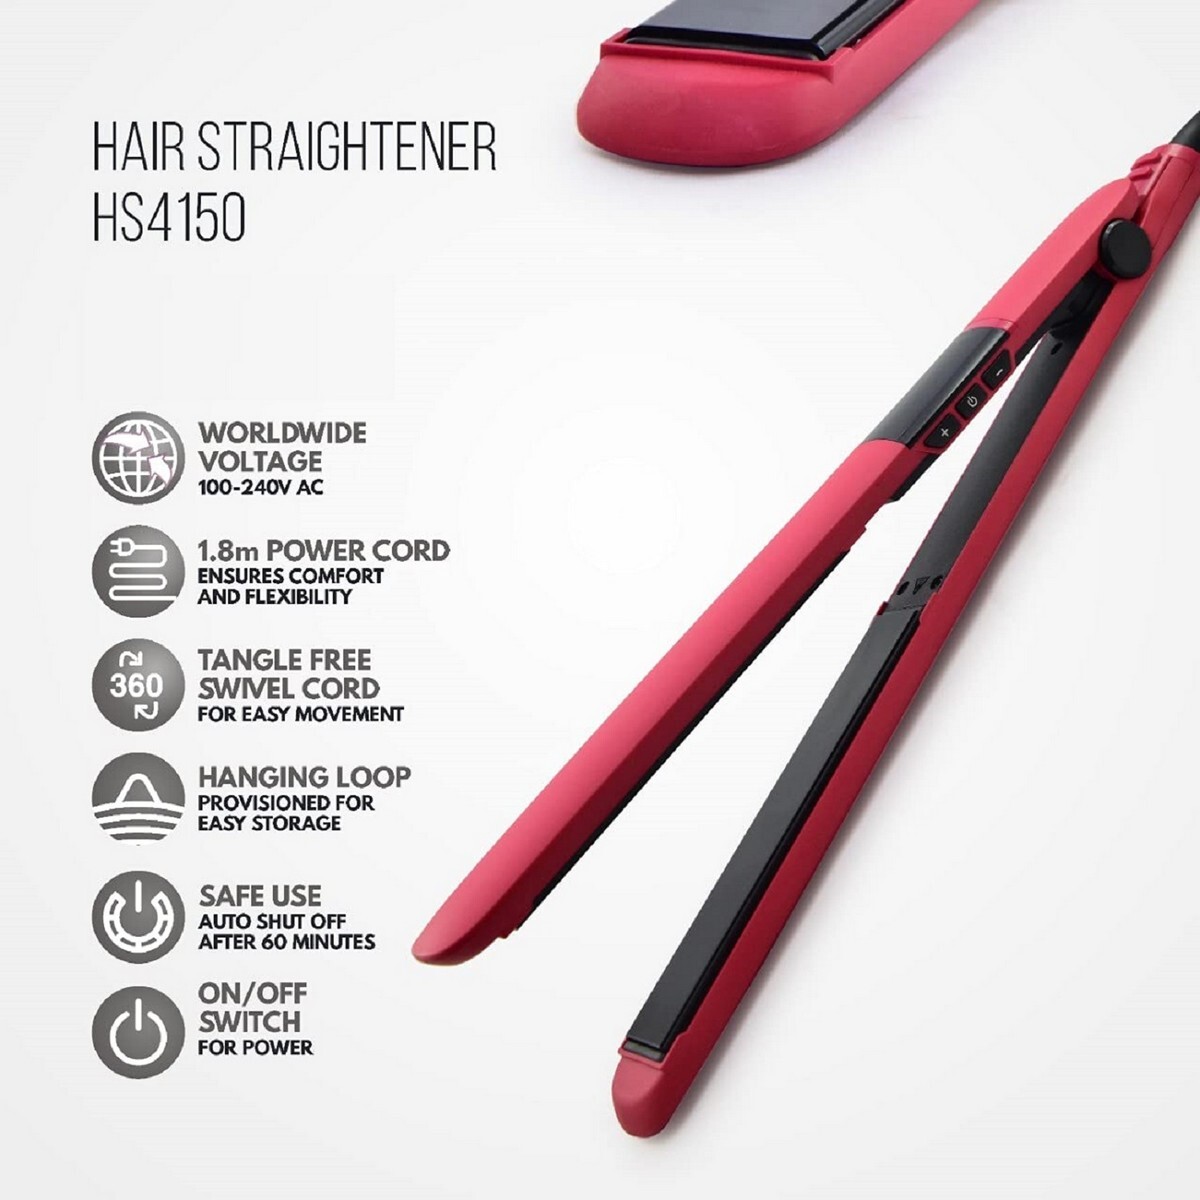 Havells HS4150 Ceramic Plates Hair Straightener with Digital Display & Adjustable temperature, Heats Up Fast Red